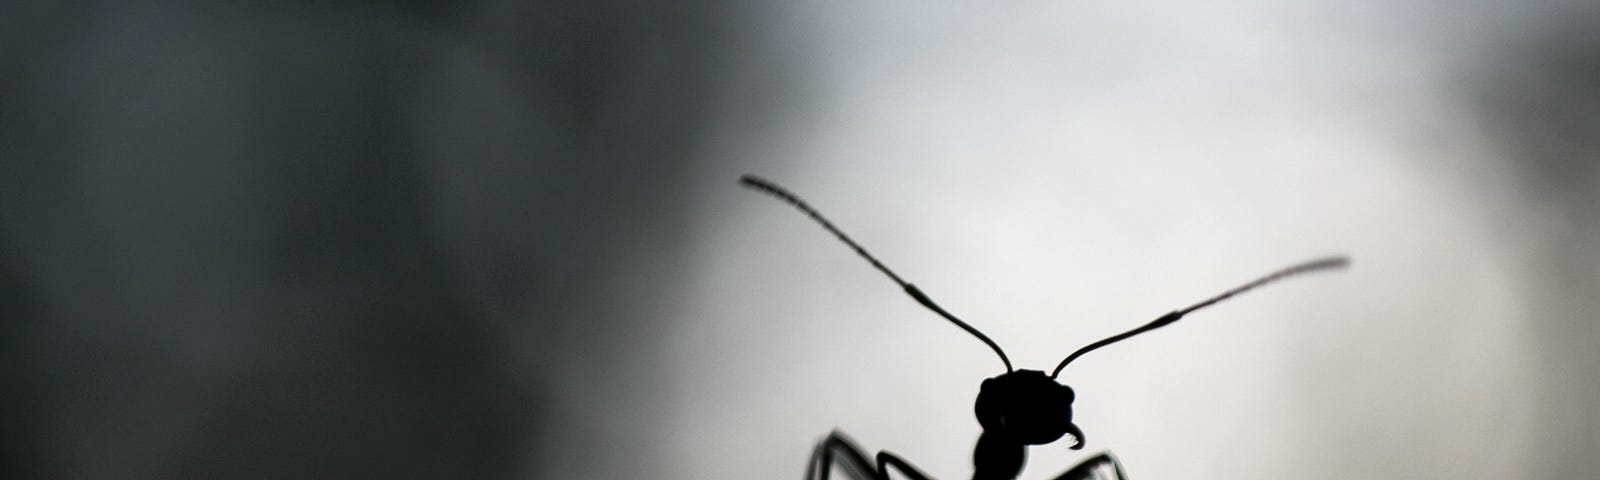 Black and white photo of an ant